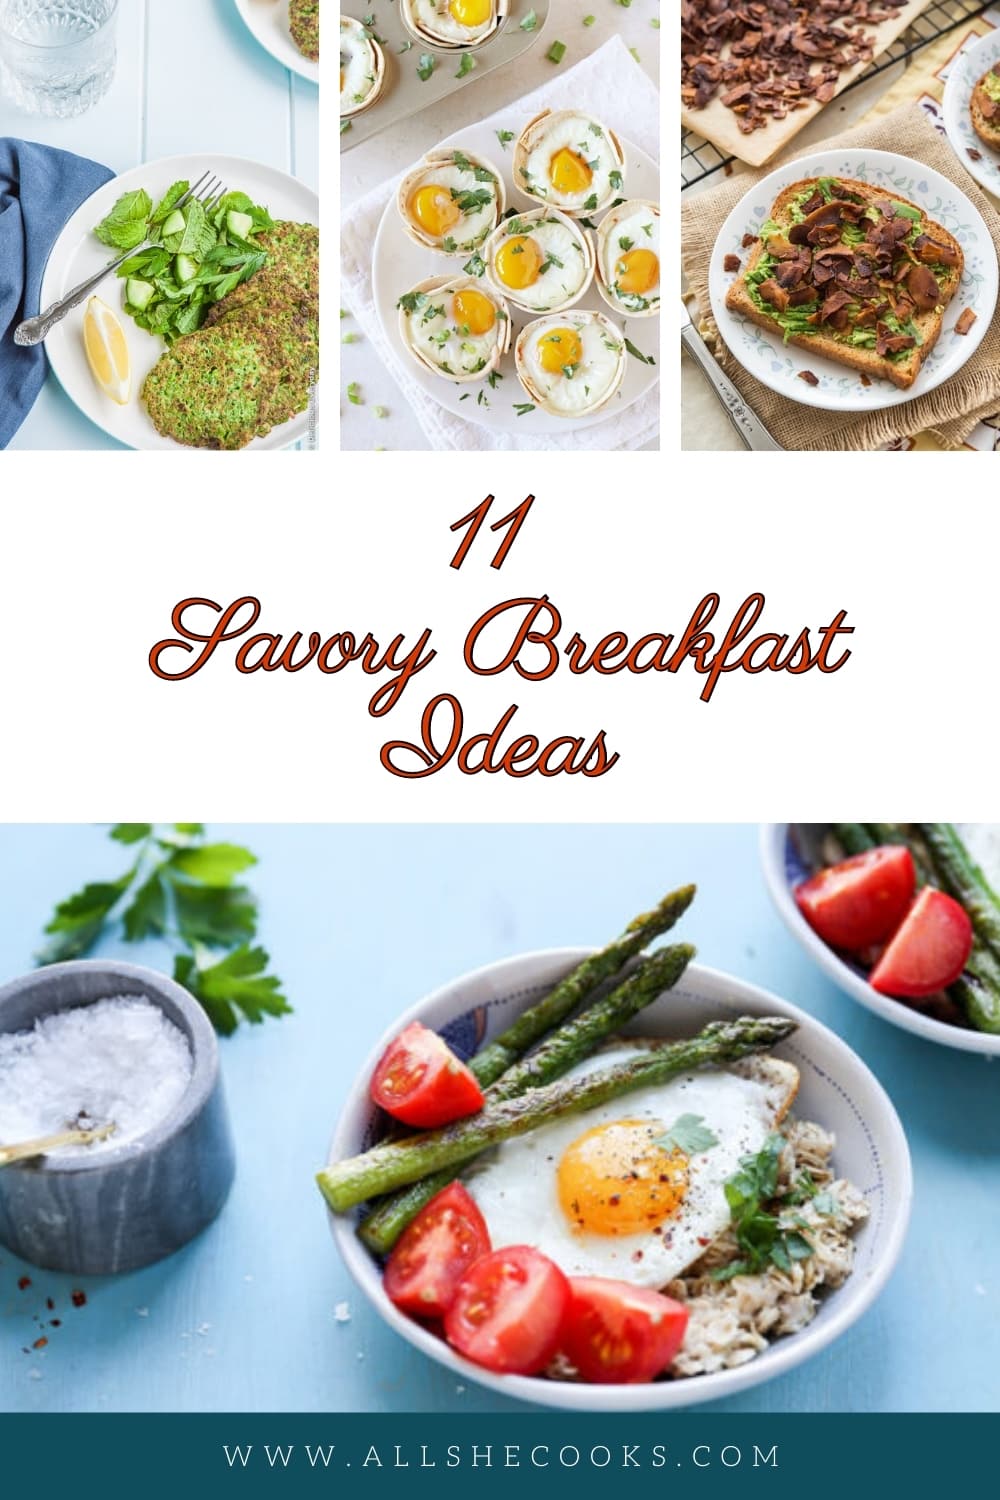 Savory Breakfast Ideas - 11 Quick & Easy! - All She Cooks